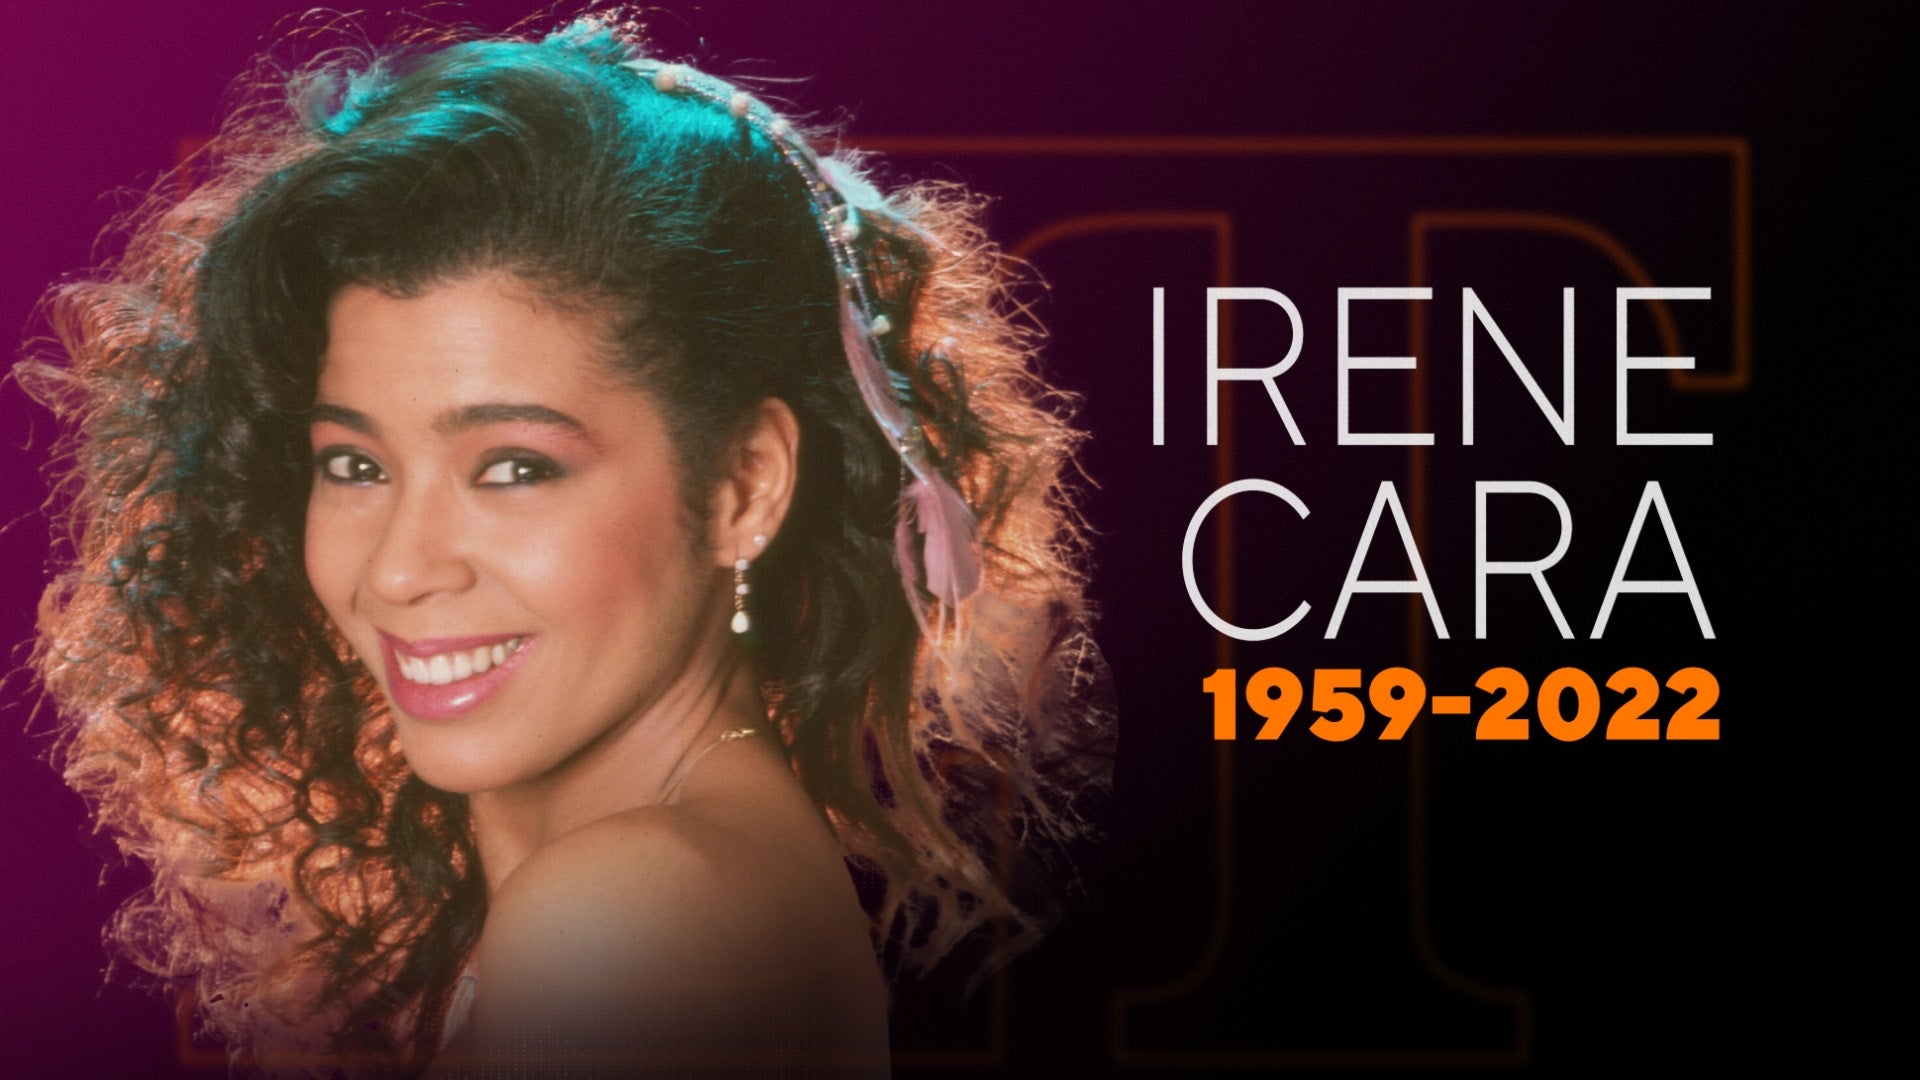 Irene Cara, 'Fame' Star and 'Flashdance' Singer, Dead at 63